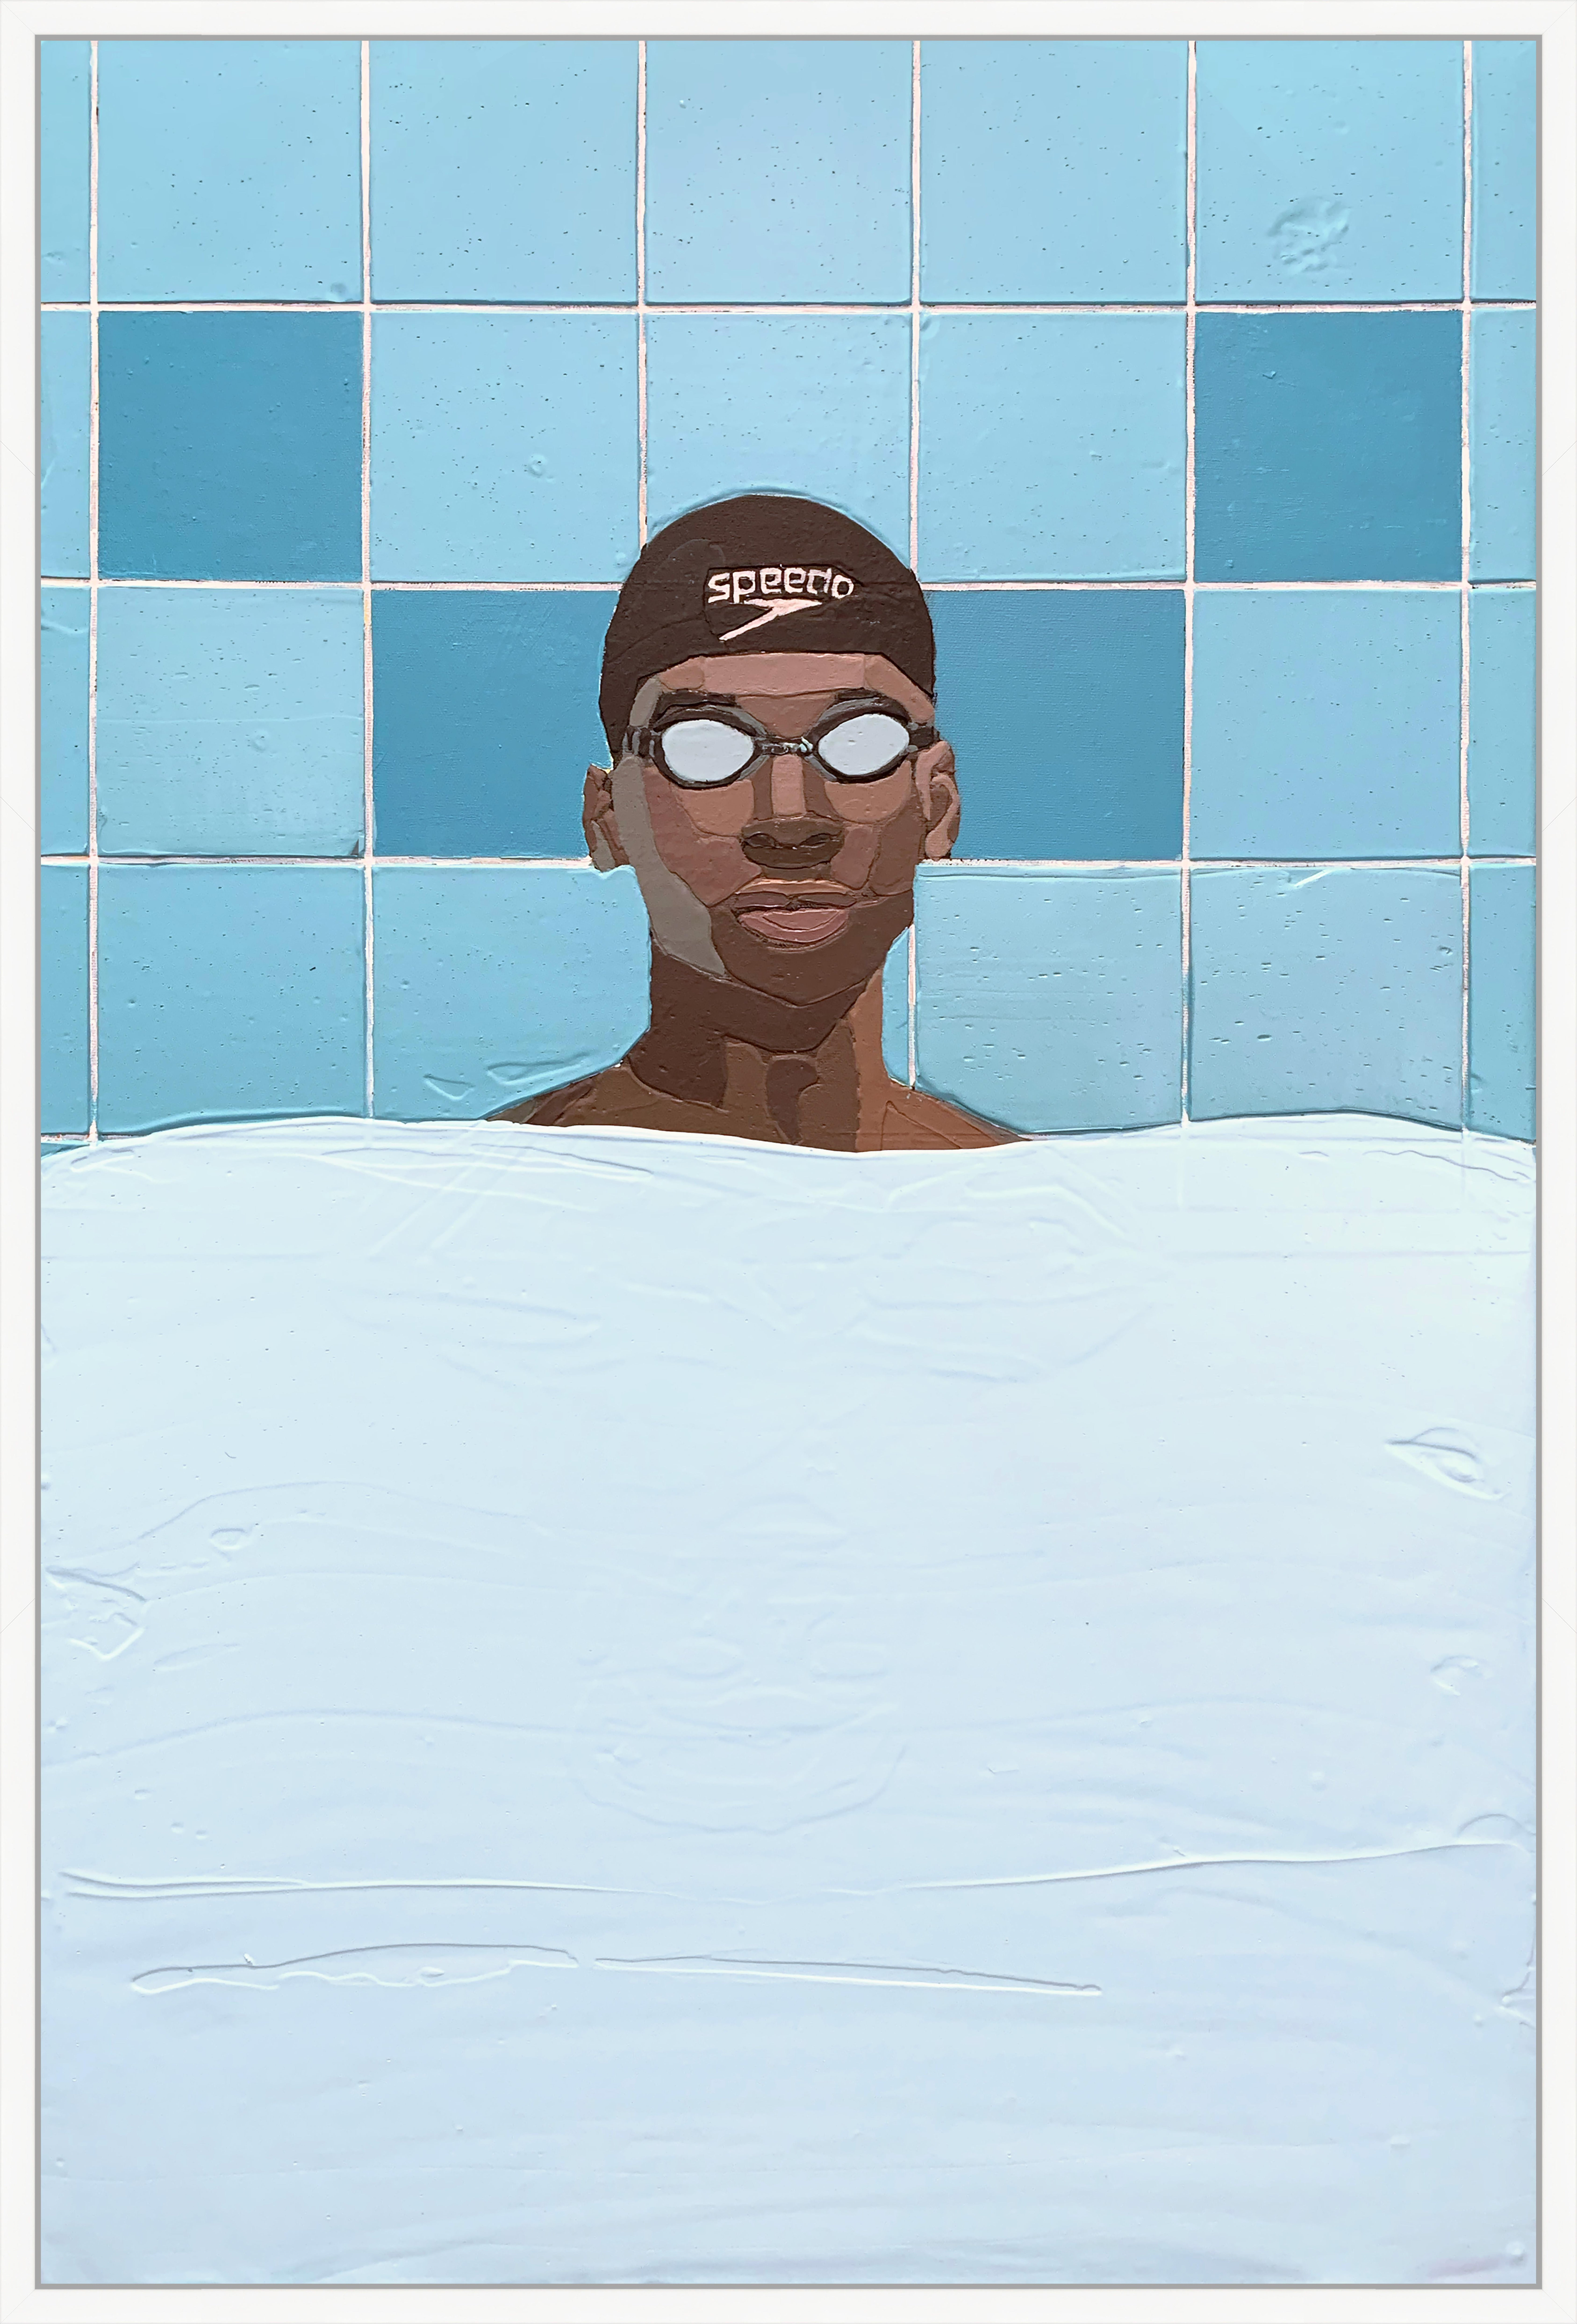 Andrew Gray Portrait Painting - "Reflection of Self" - Acrylic Painting with Swimmer, Goggles, Pool Vibes